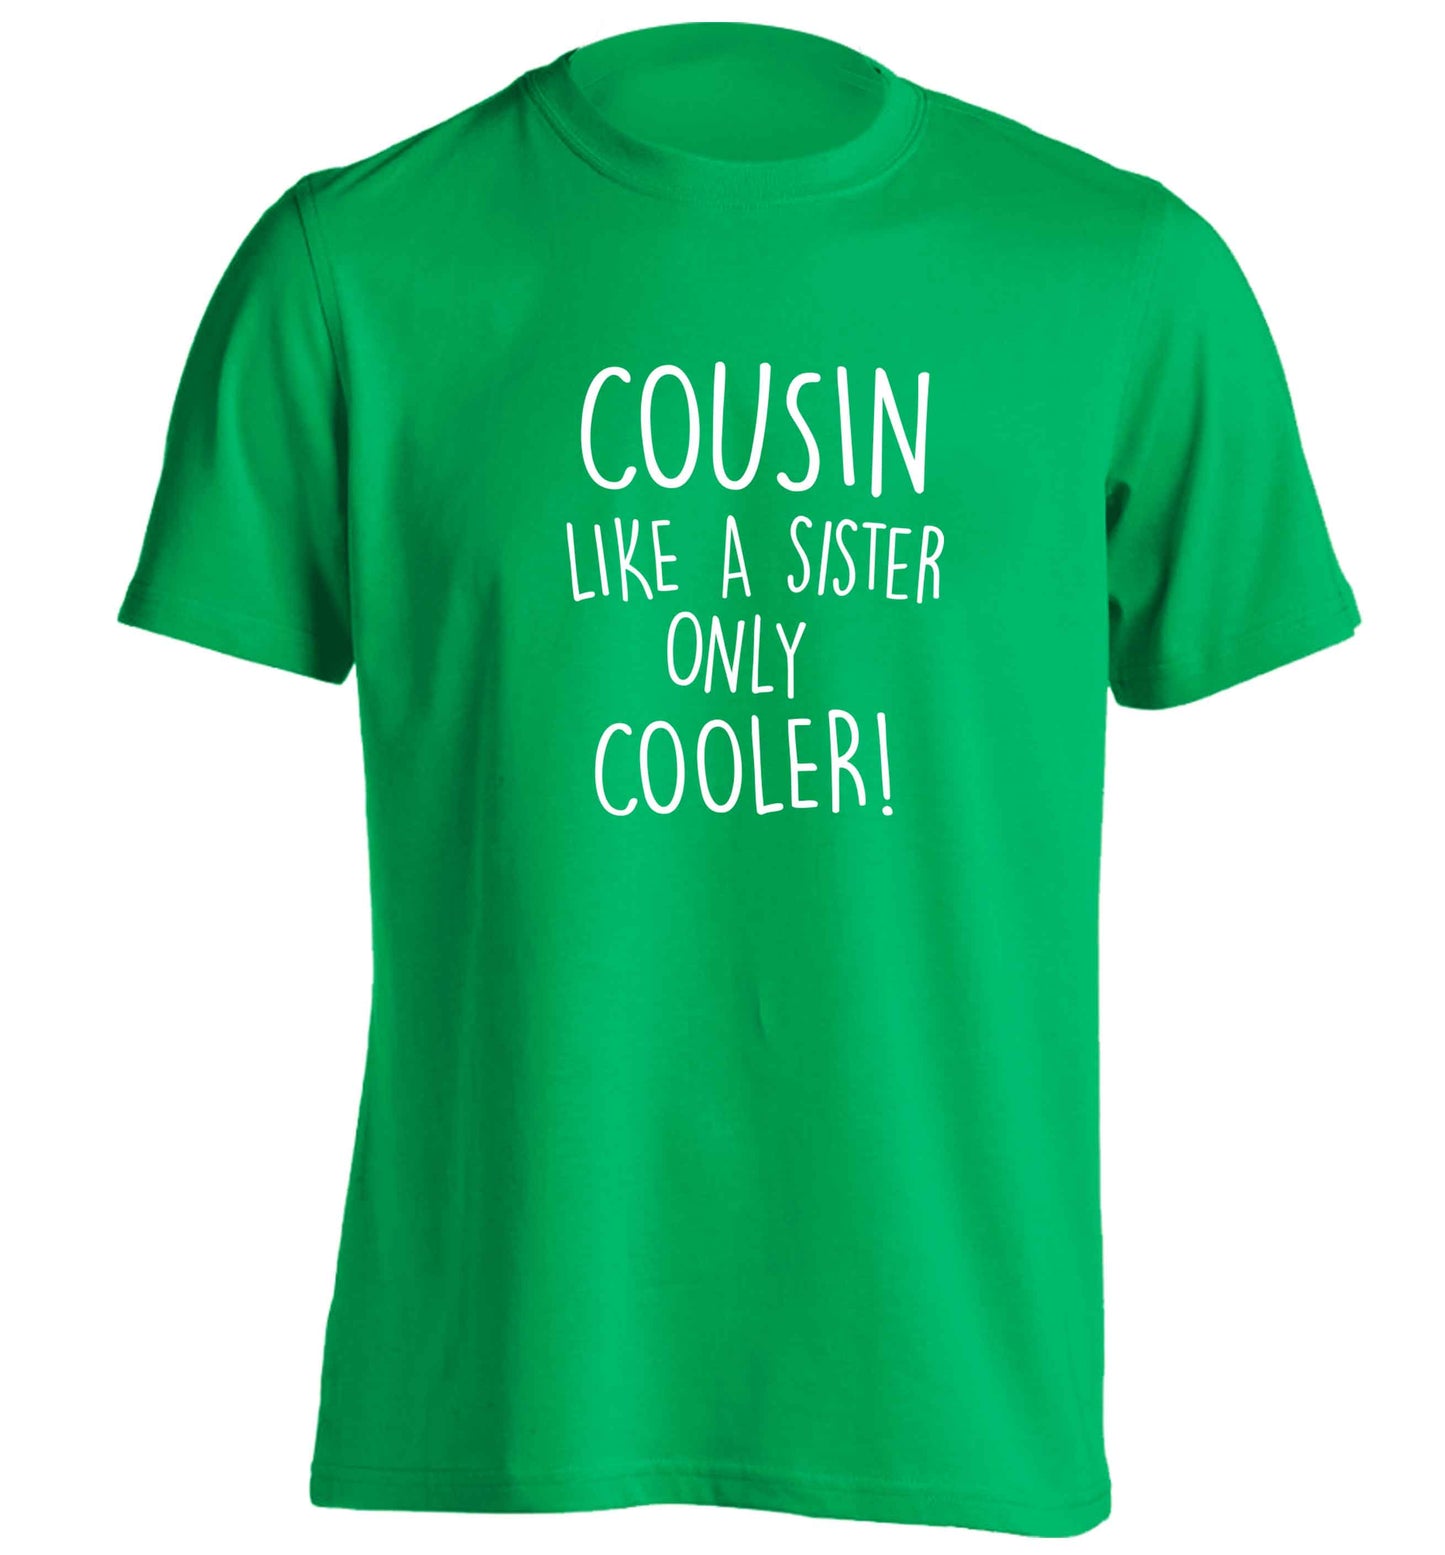 Cousin like a sister only cooler adults unisex green Tshirt 2XL